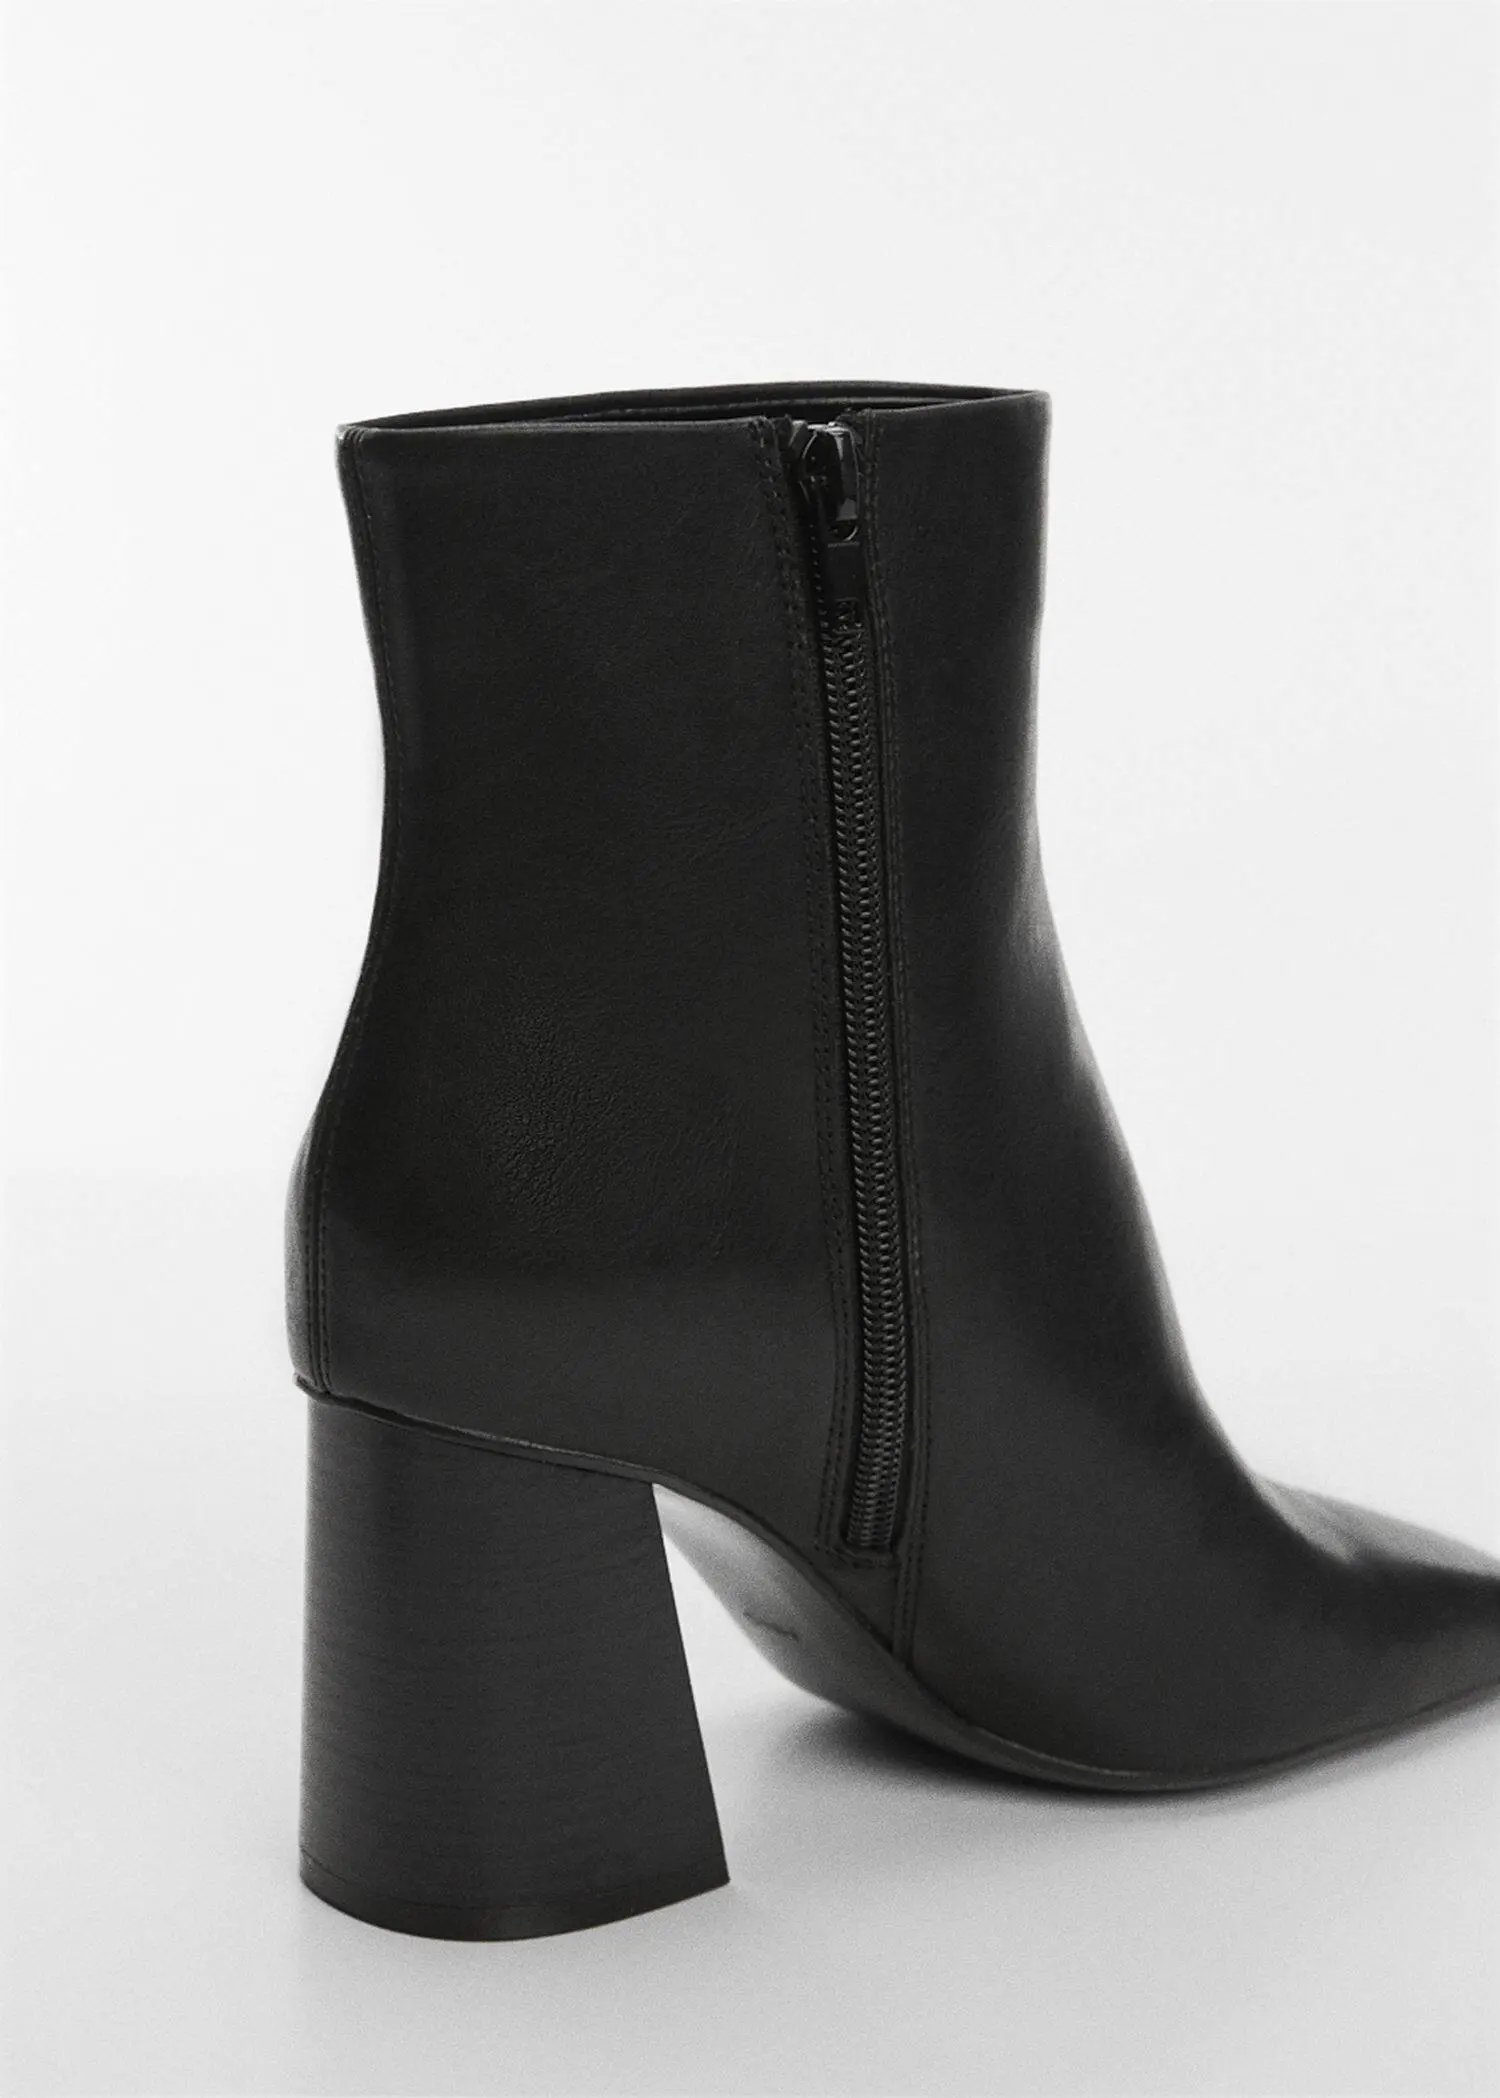 Mango Ankle boots with square toe heel. 3